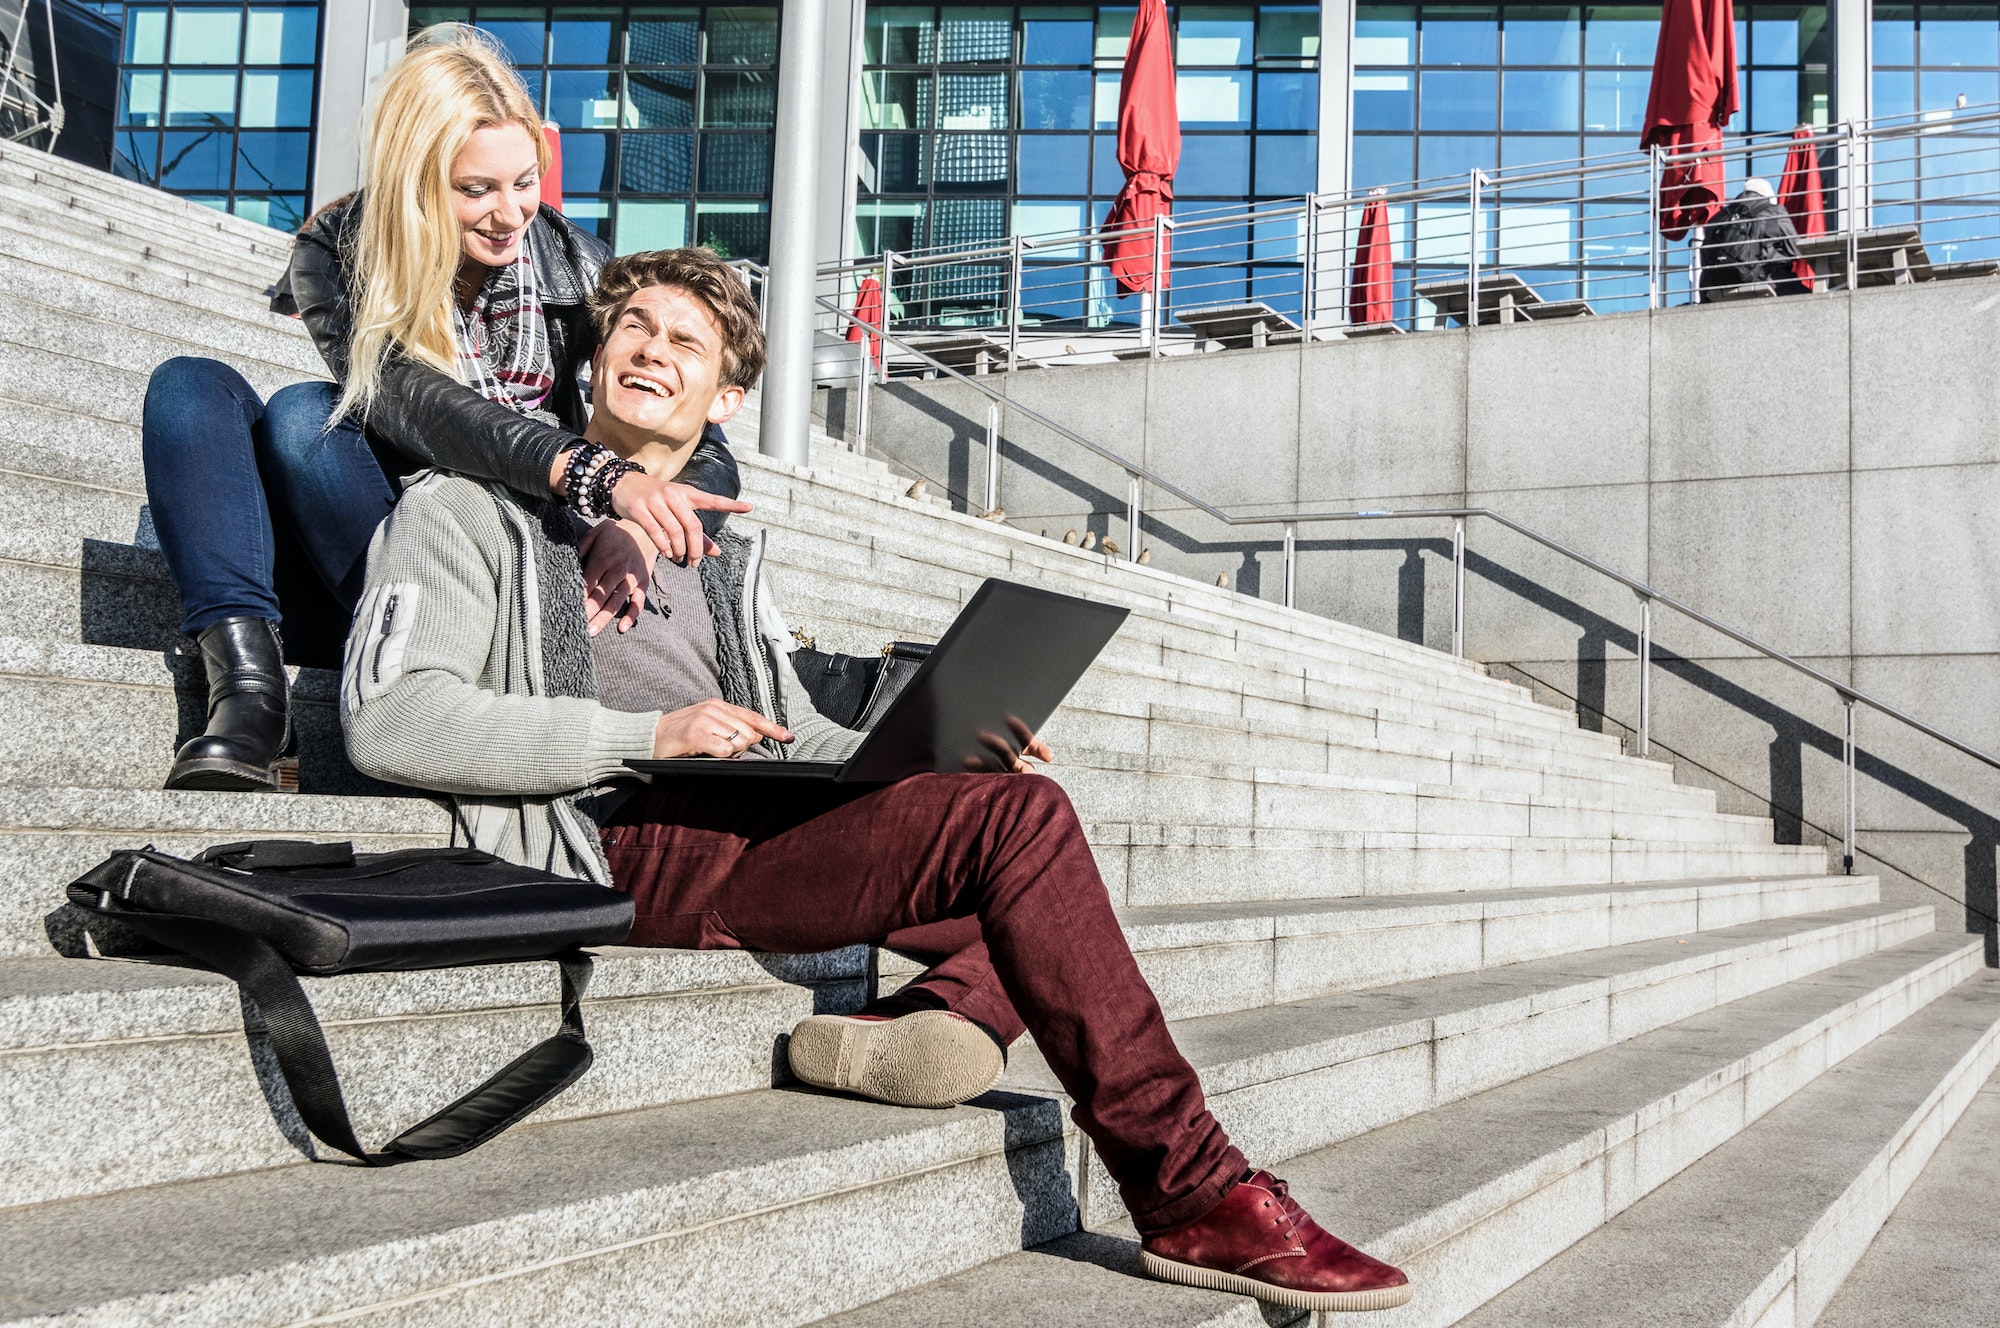 Hipster couple having fun using computer laptop in urban location on winter day